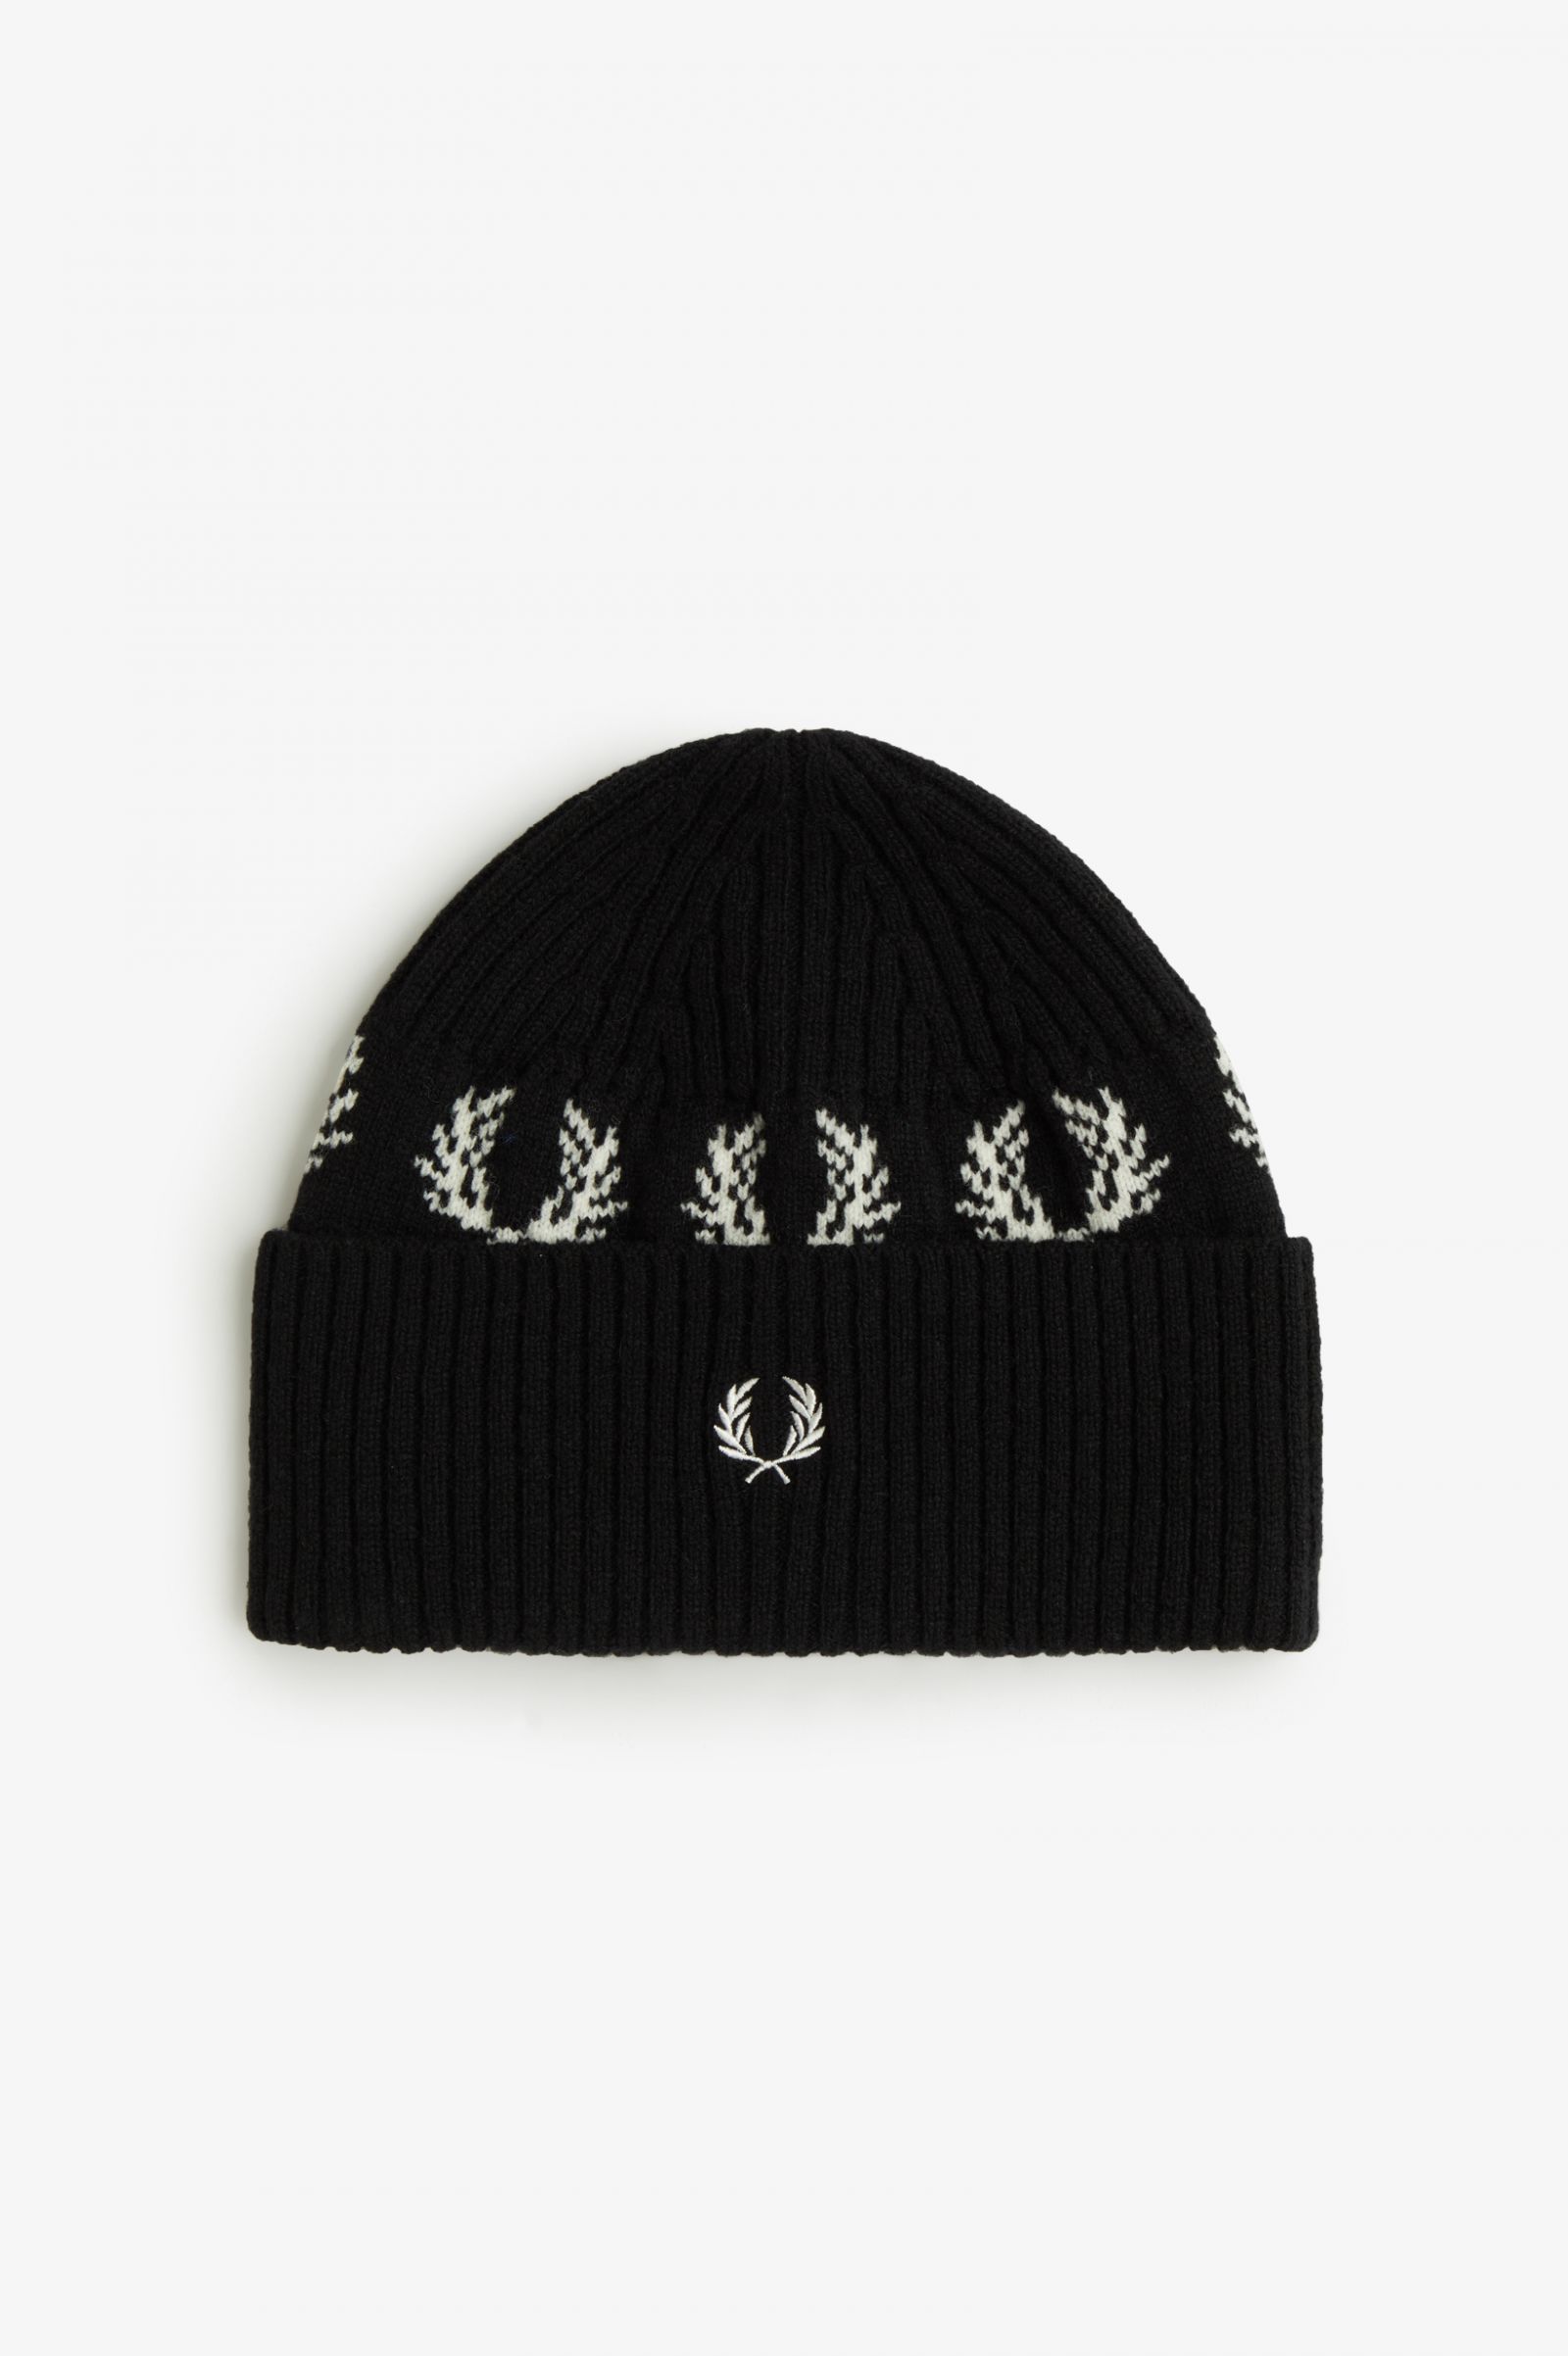 Laurel Wreath Lambswool Beanie - Black / Snow White | Accessories | Hats,  Wallets, Purses, Socks & Jewellery | Fred Perry US